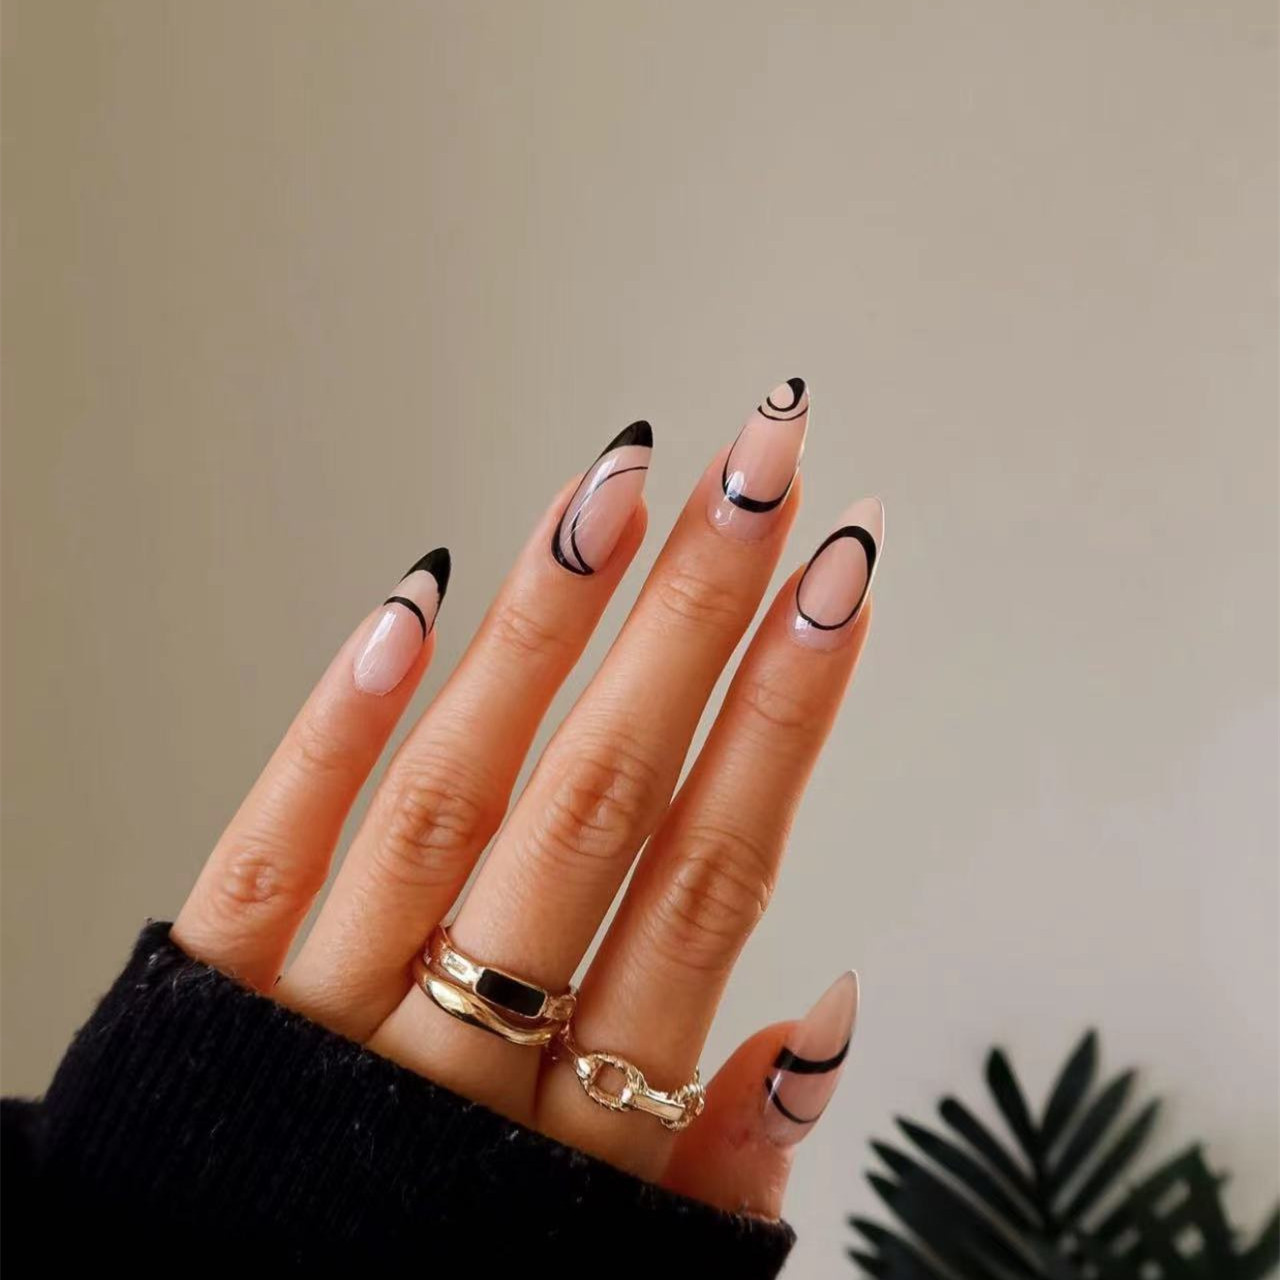 43+ Coffin Shaped French Tip Nails Designs To Try